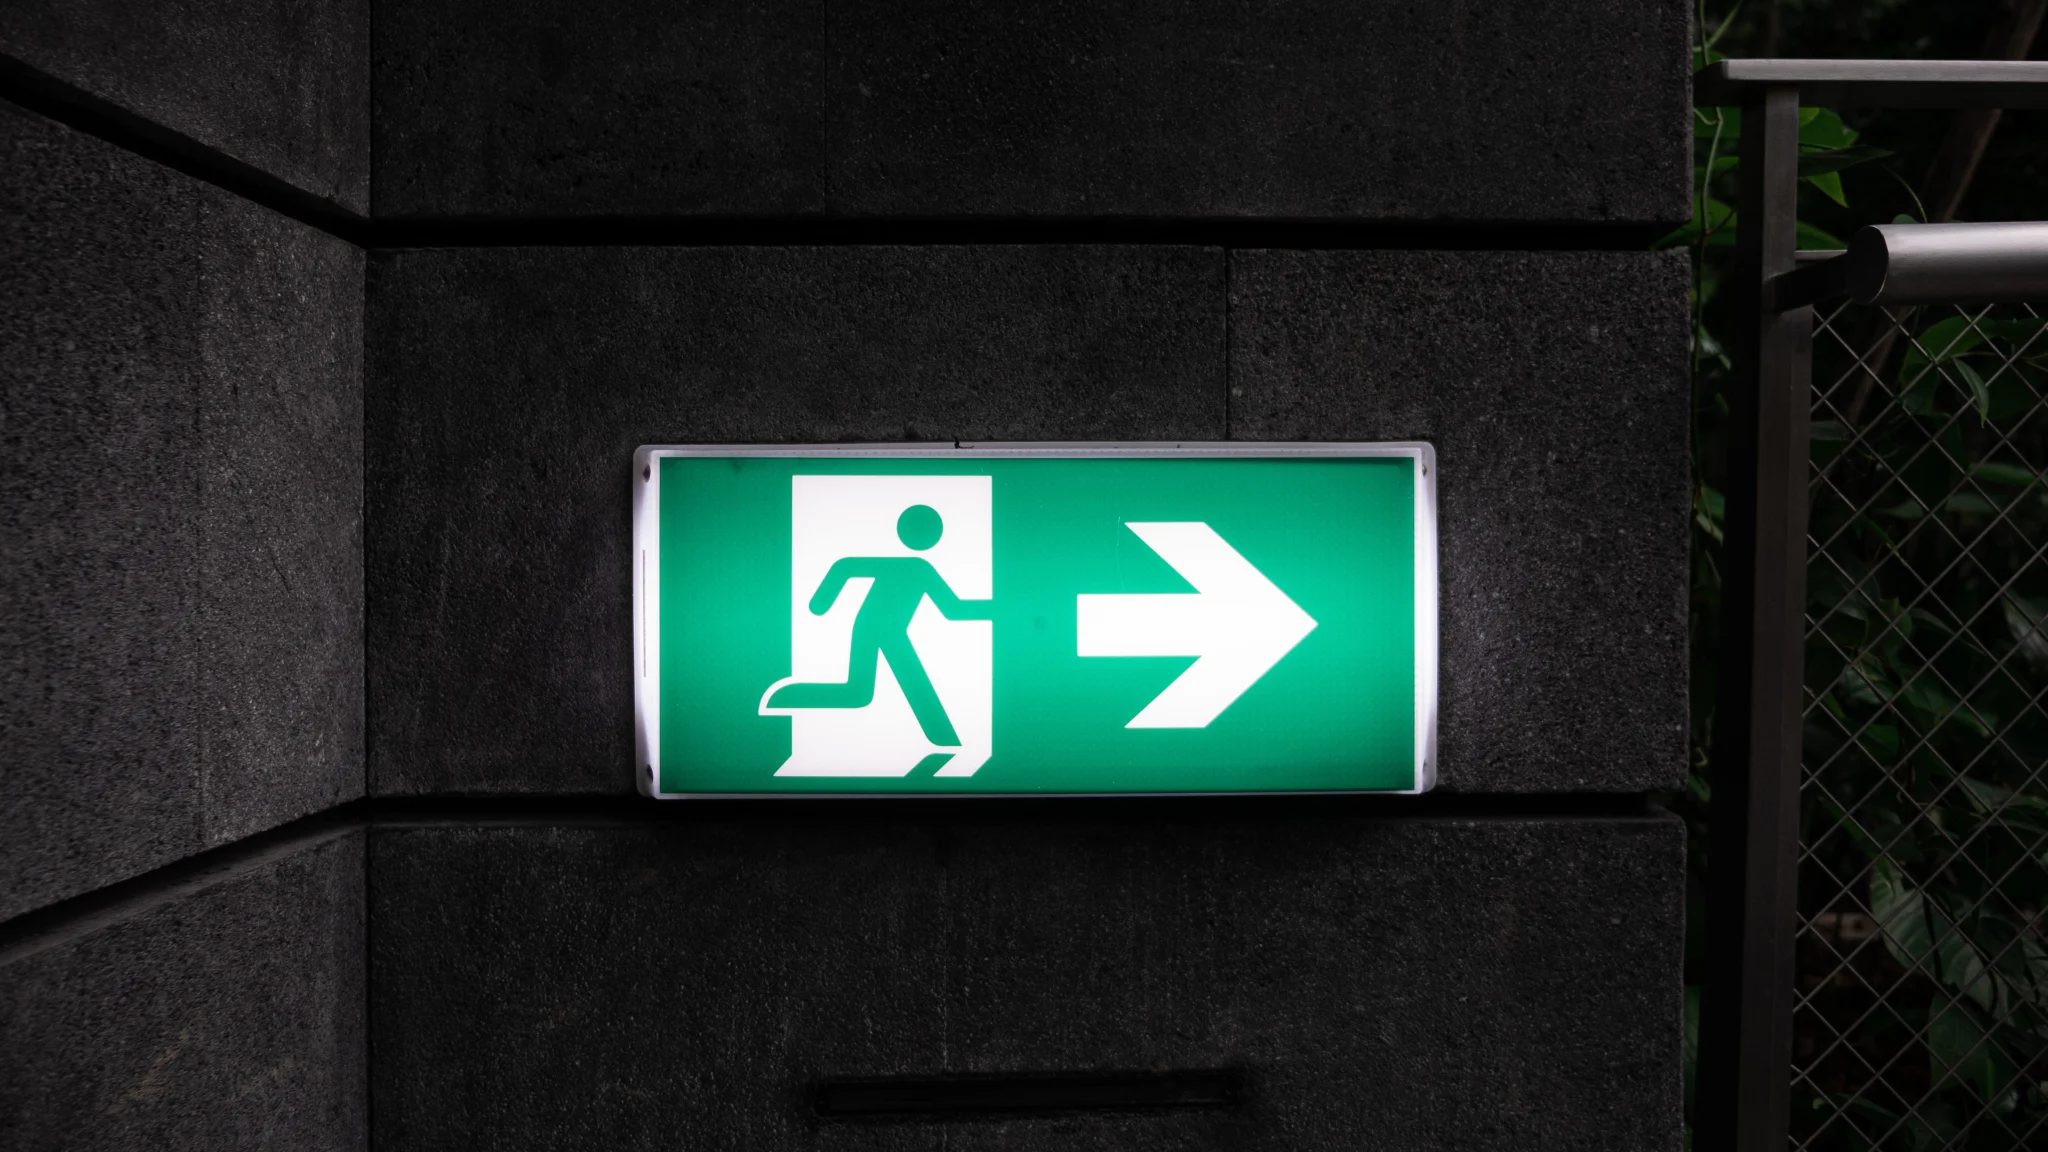 exit sign indicating gross misconduct dismissal